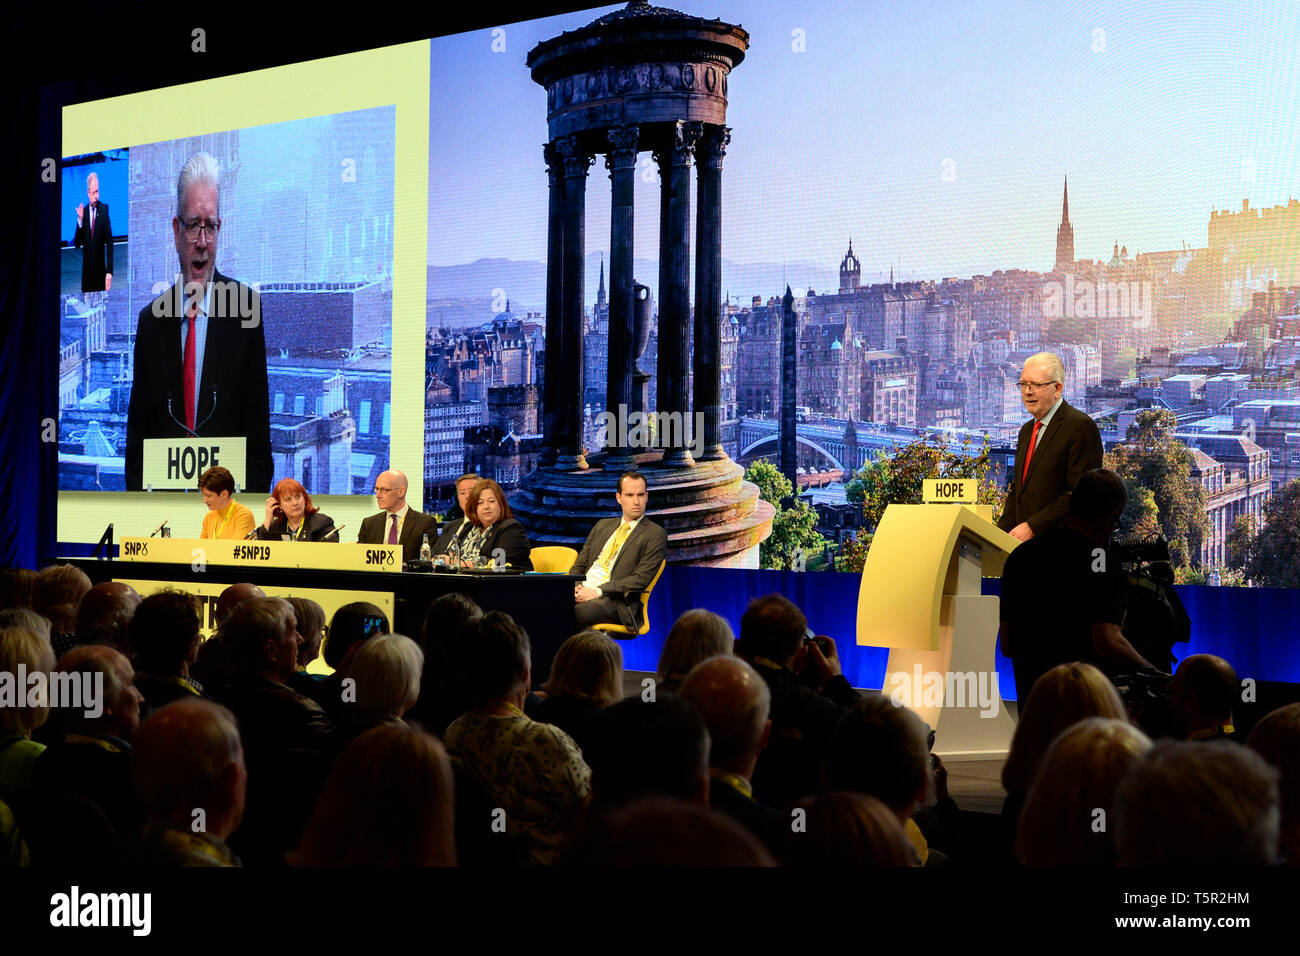 Edinburgh, Scotland, United Kingdom. 27th Apr, 2019. Scottish Cabinet Secretary for Constitutional Relations Mike Russell waits in the wings prepares to open the Scottish National Party's Spring Conference in the Edinburgh International Conference Centre. Credit: Ken Jack/Alamy Live News Stock Photo